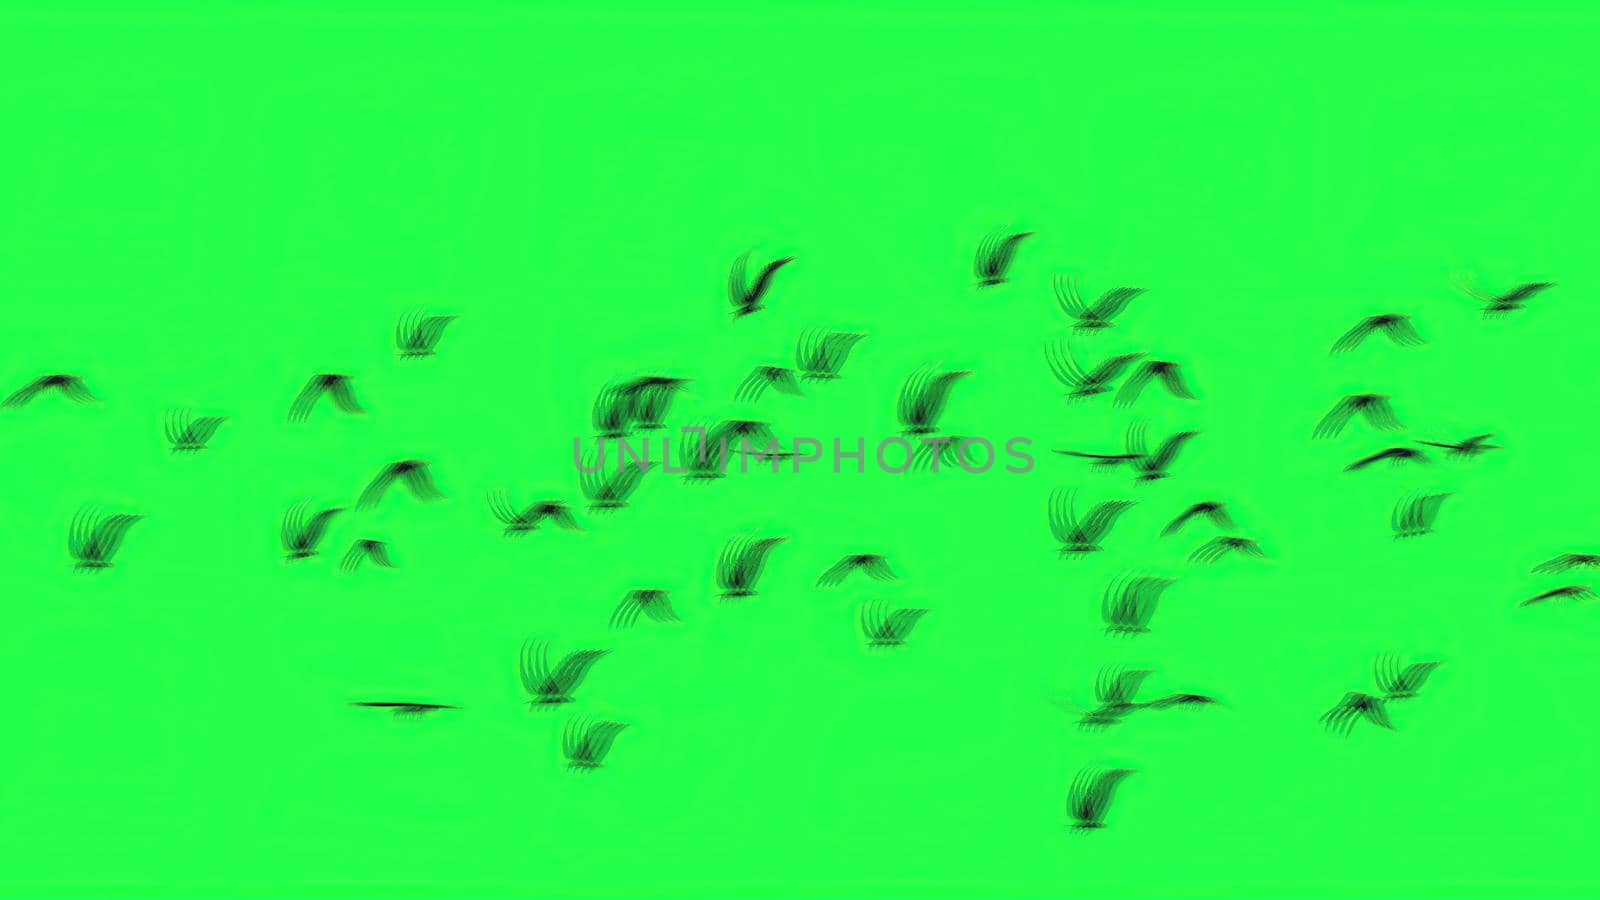 3d illustration - Group of birds with isolated sky on green screen 